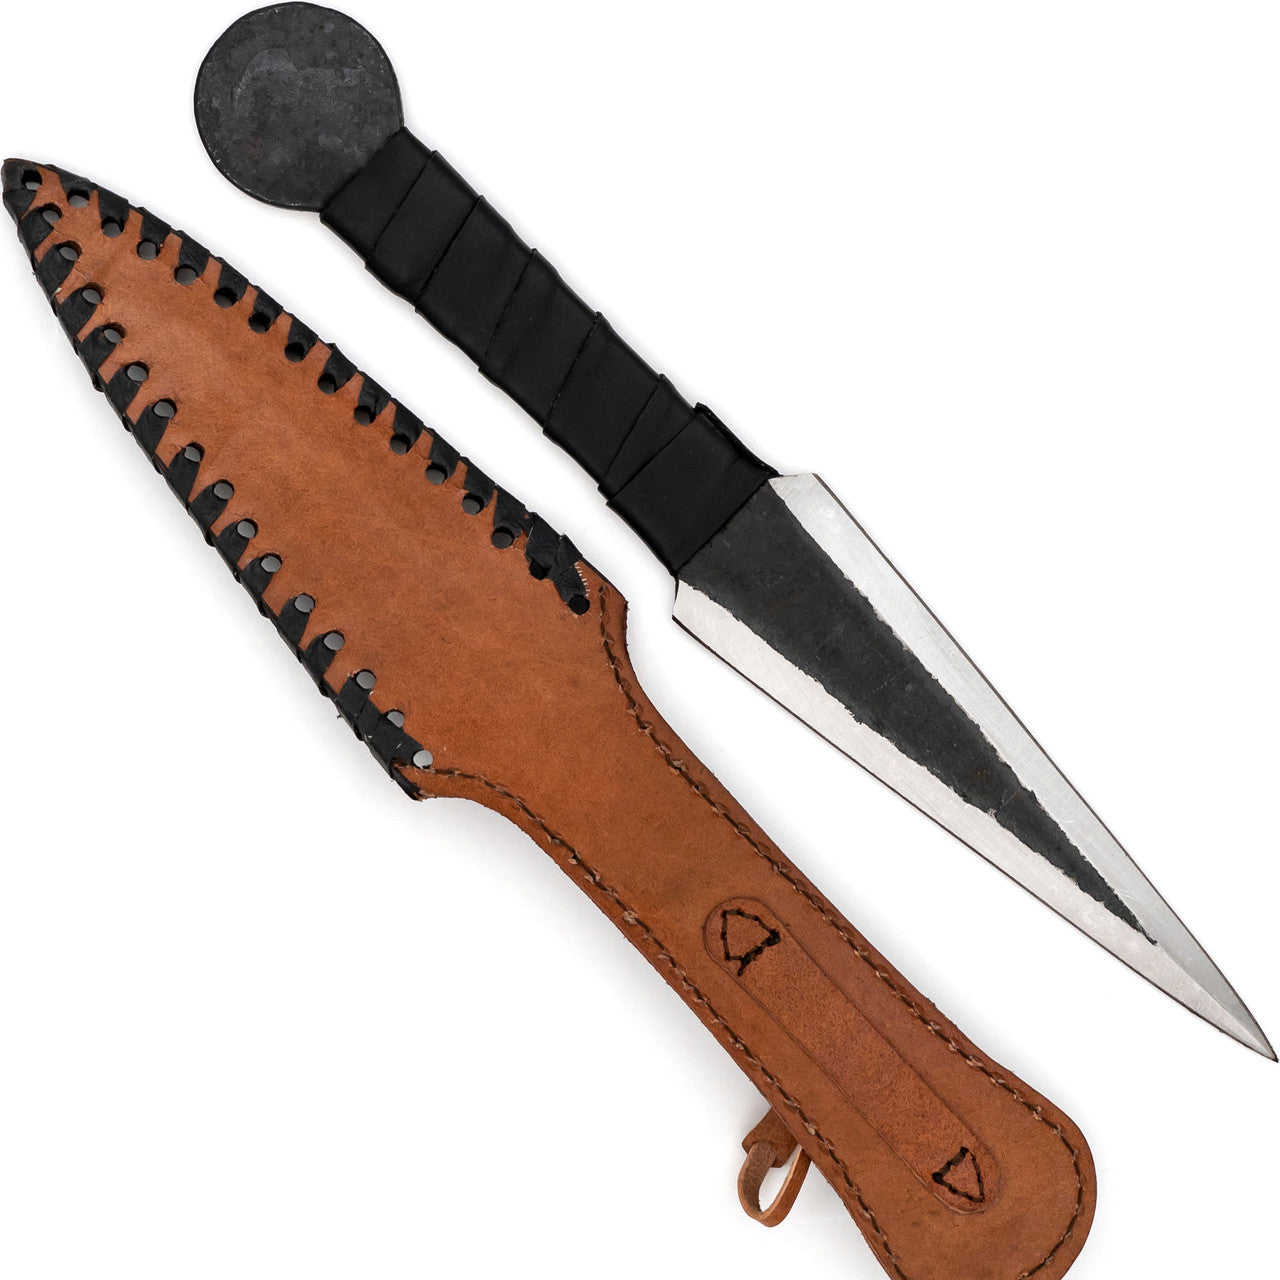 Soaring Heights Forged Carbon Steel Medieval Viking Style Throwing Dagger Knife-1